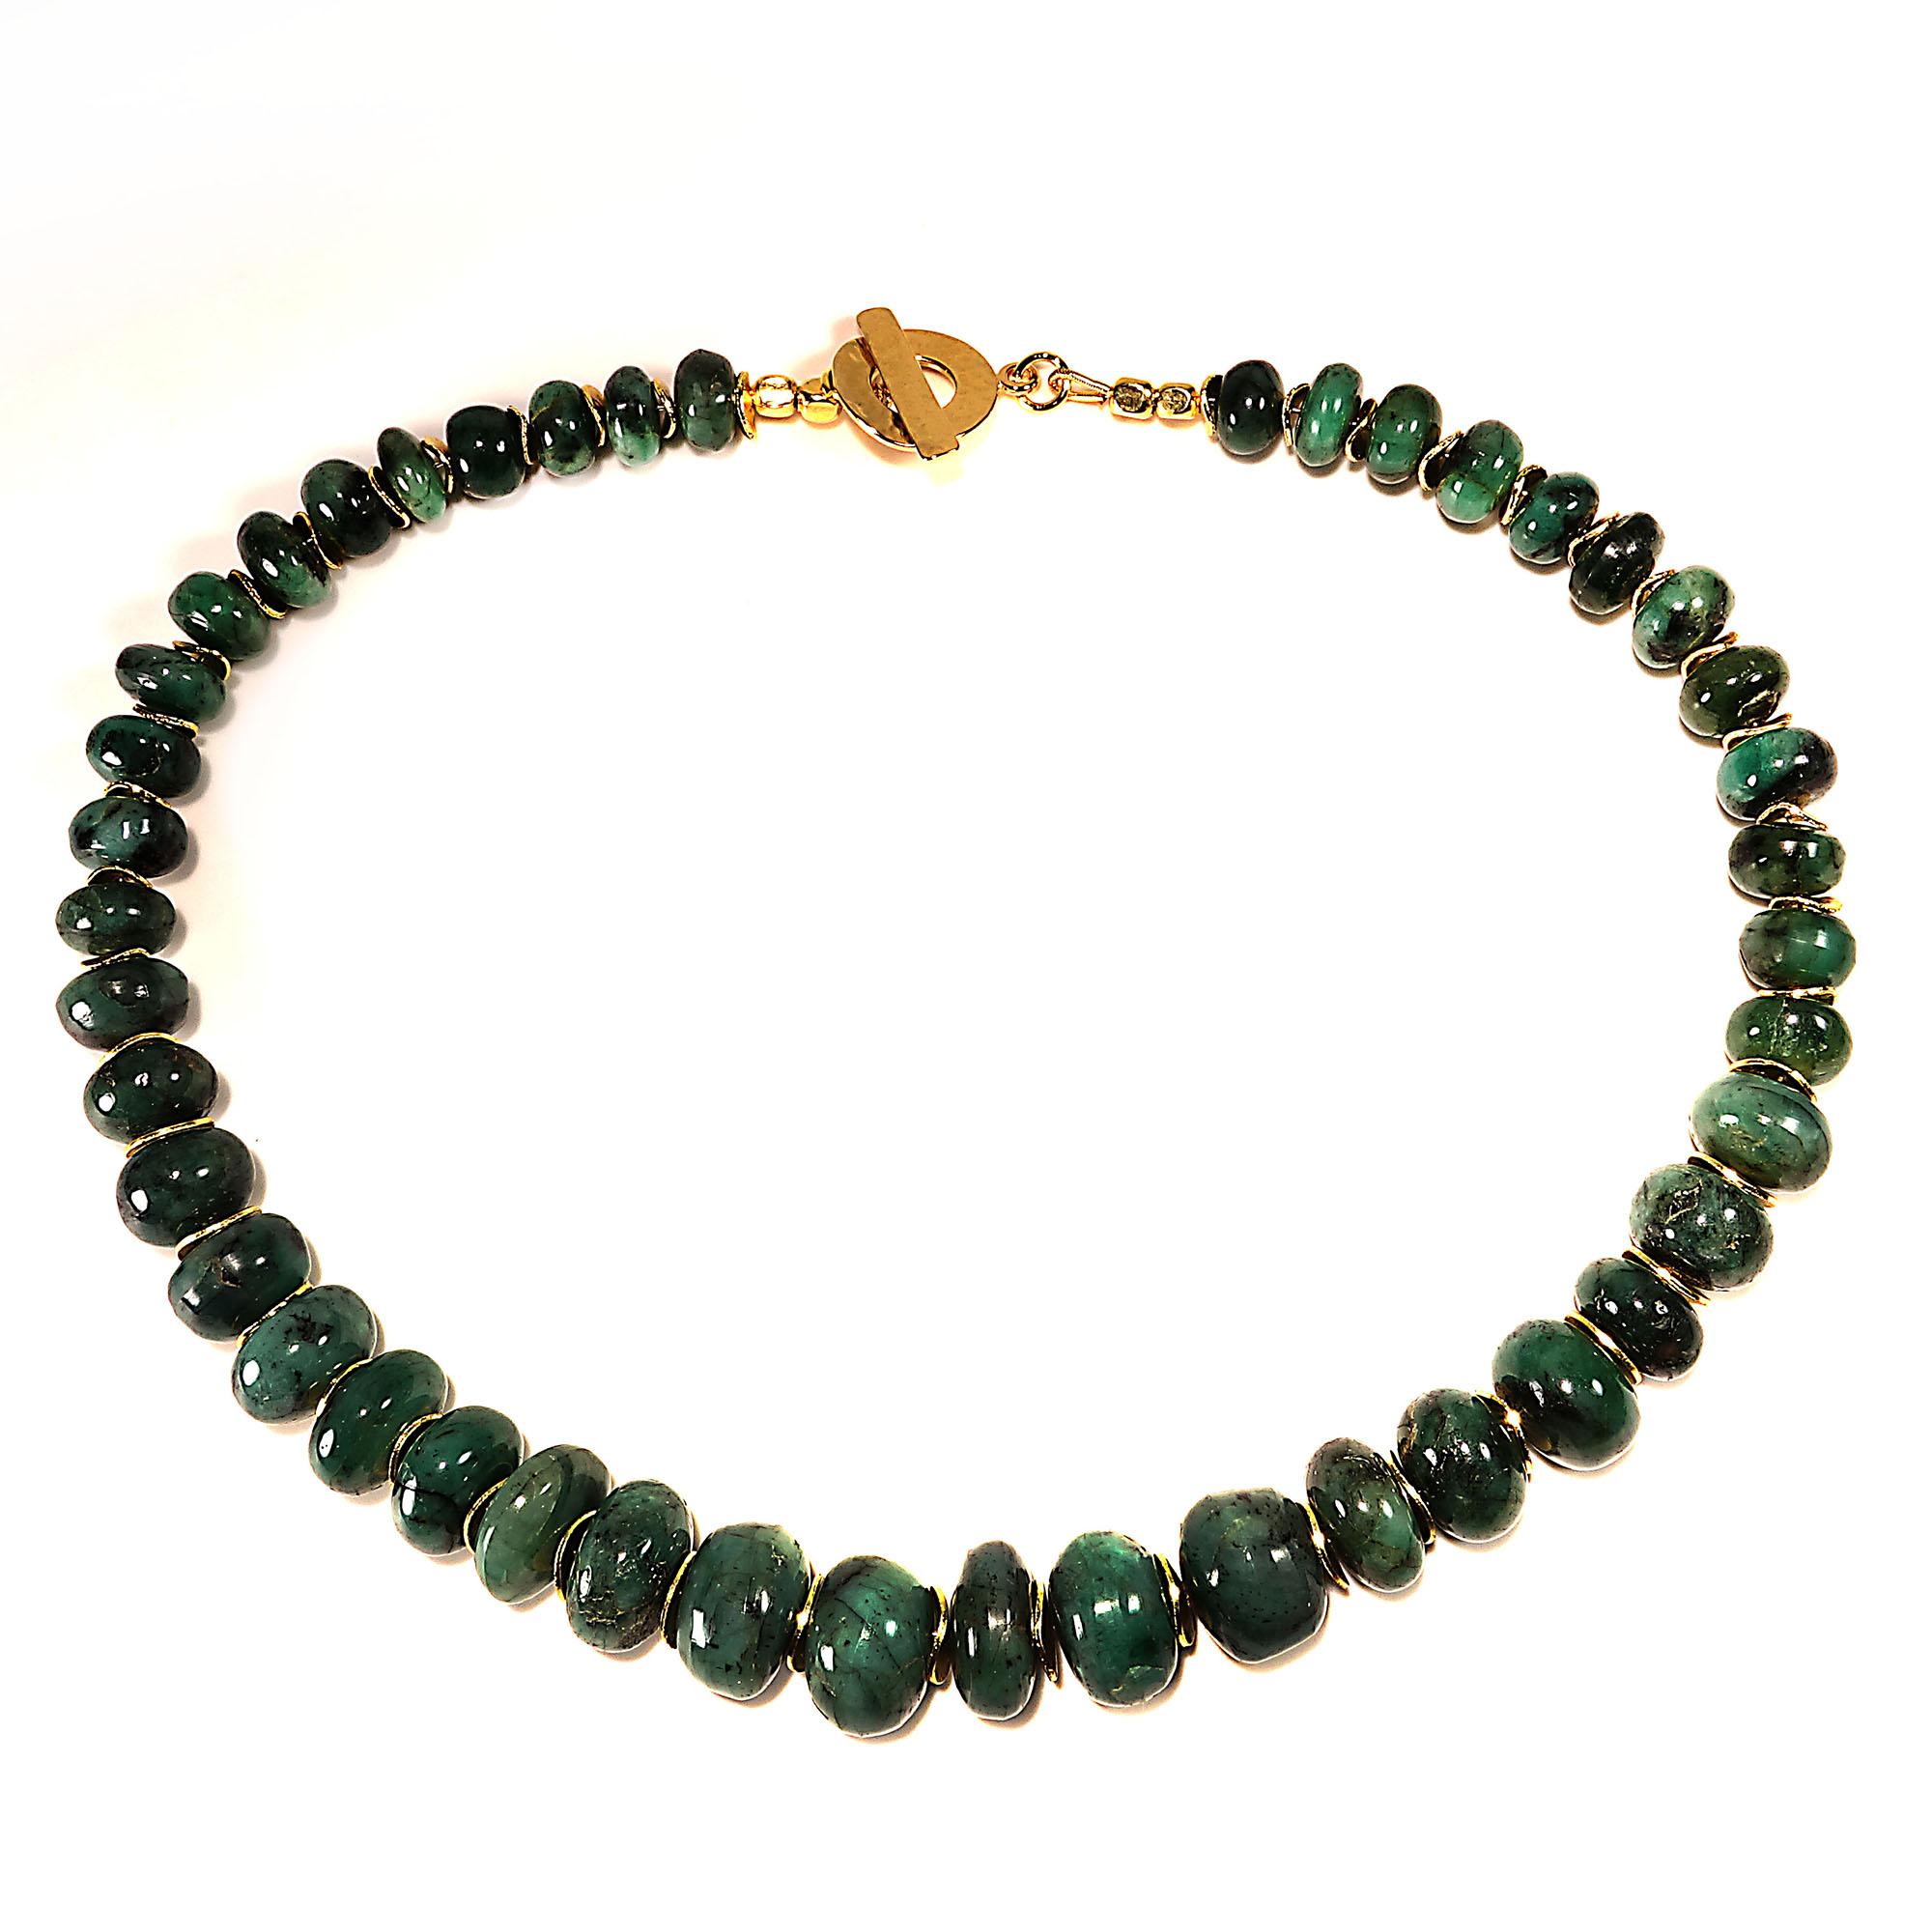 16.5 Inch choker necklace of emerald rondels accented with gold tone flutters.  This handmade emerald in matrix choker is a pleasure to wear and green such a great color to wear.  The highly polished rondels of opaque emerald are unique in size and